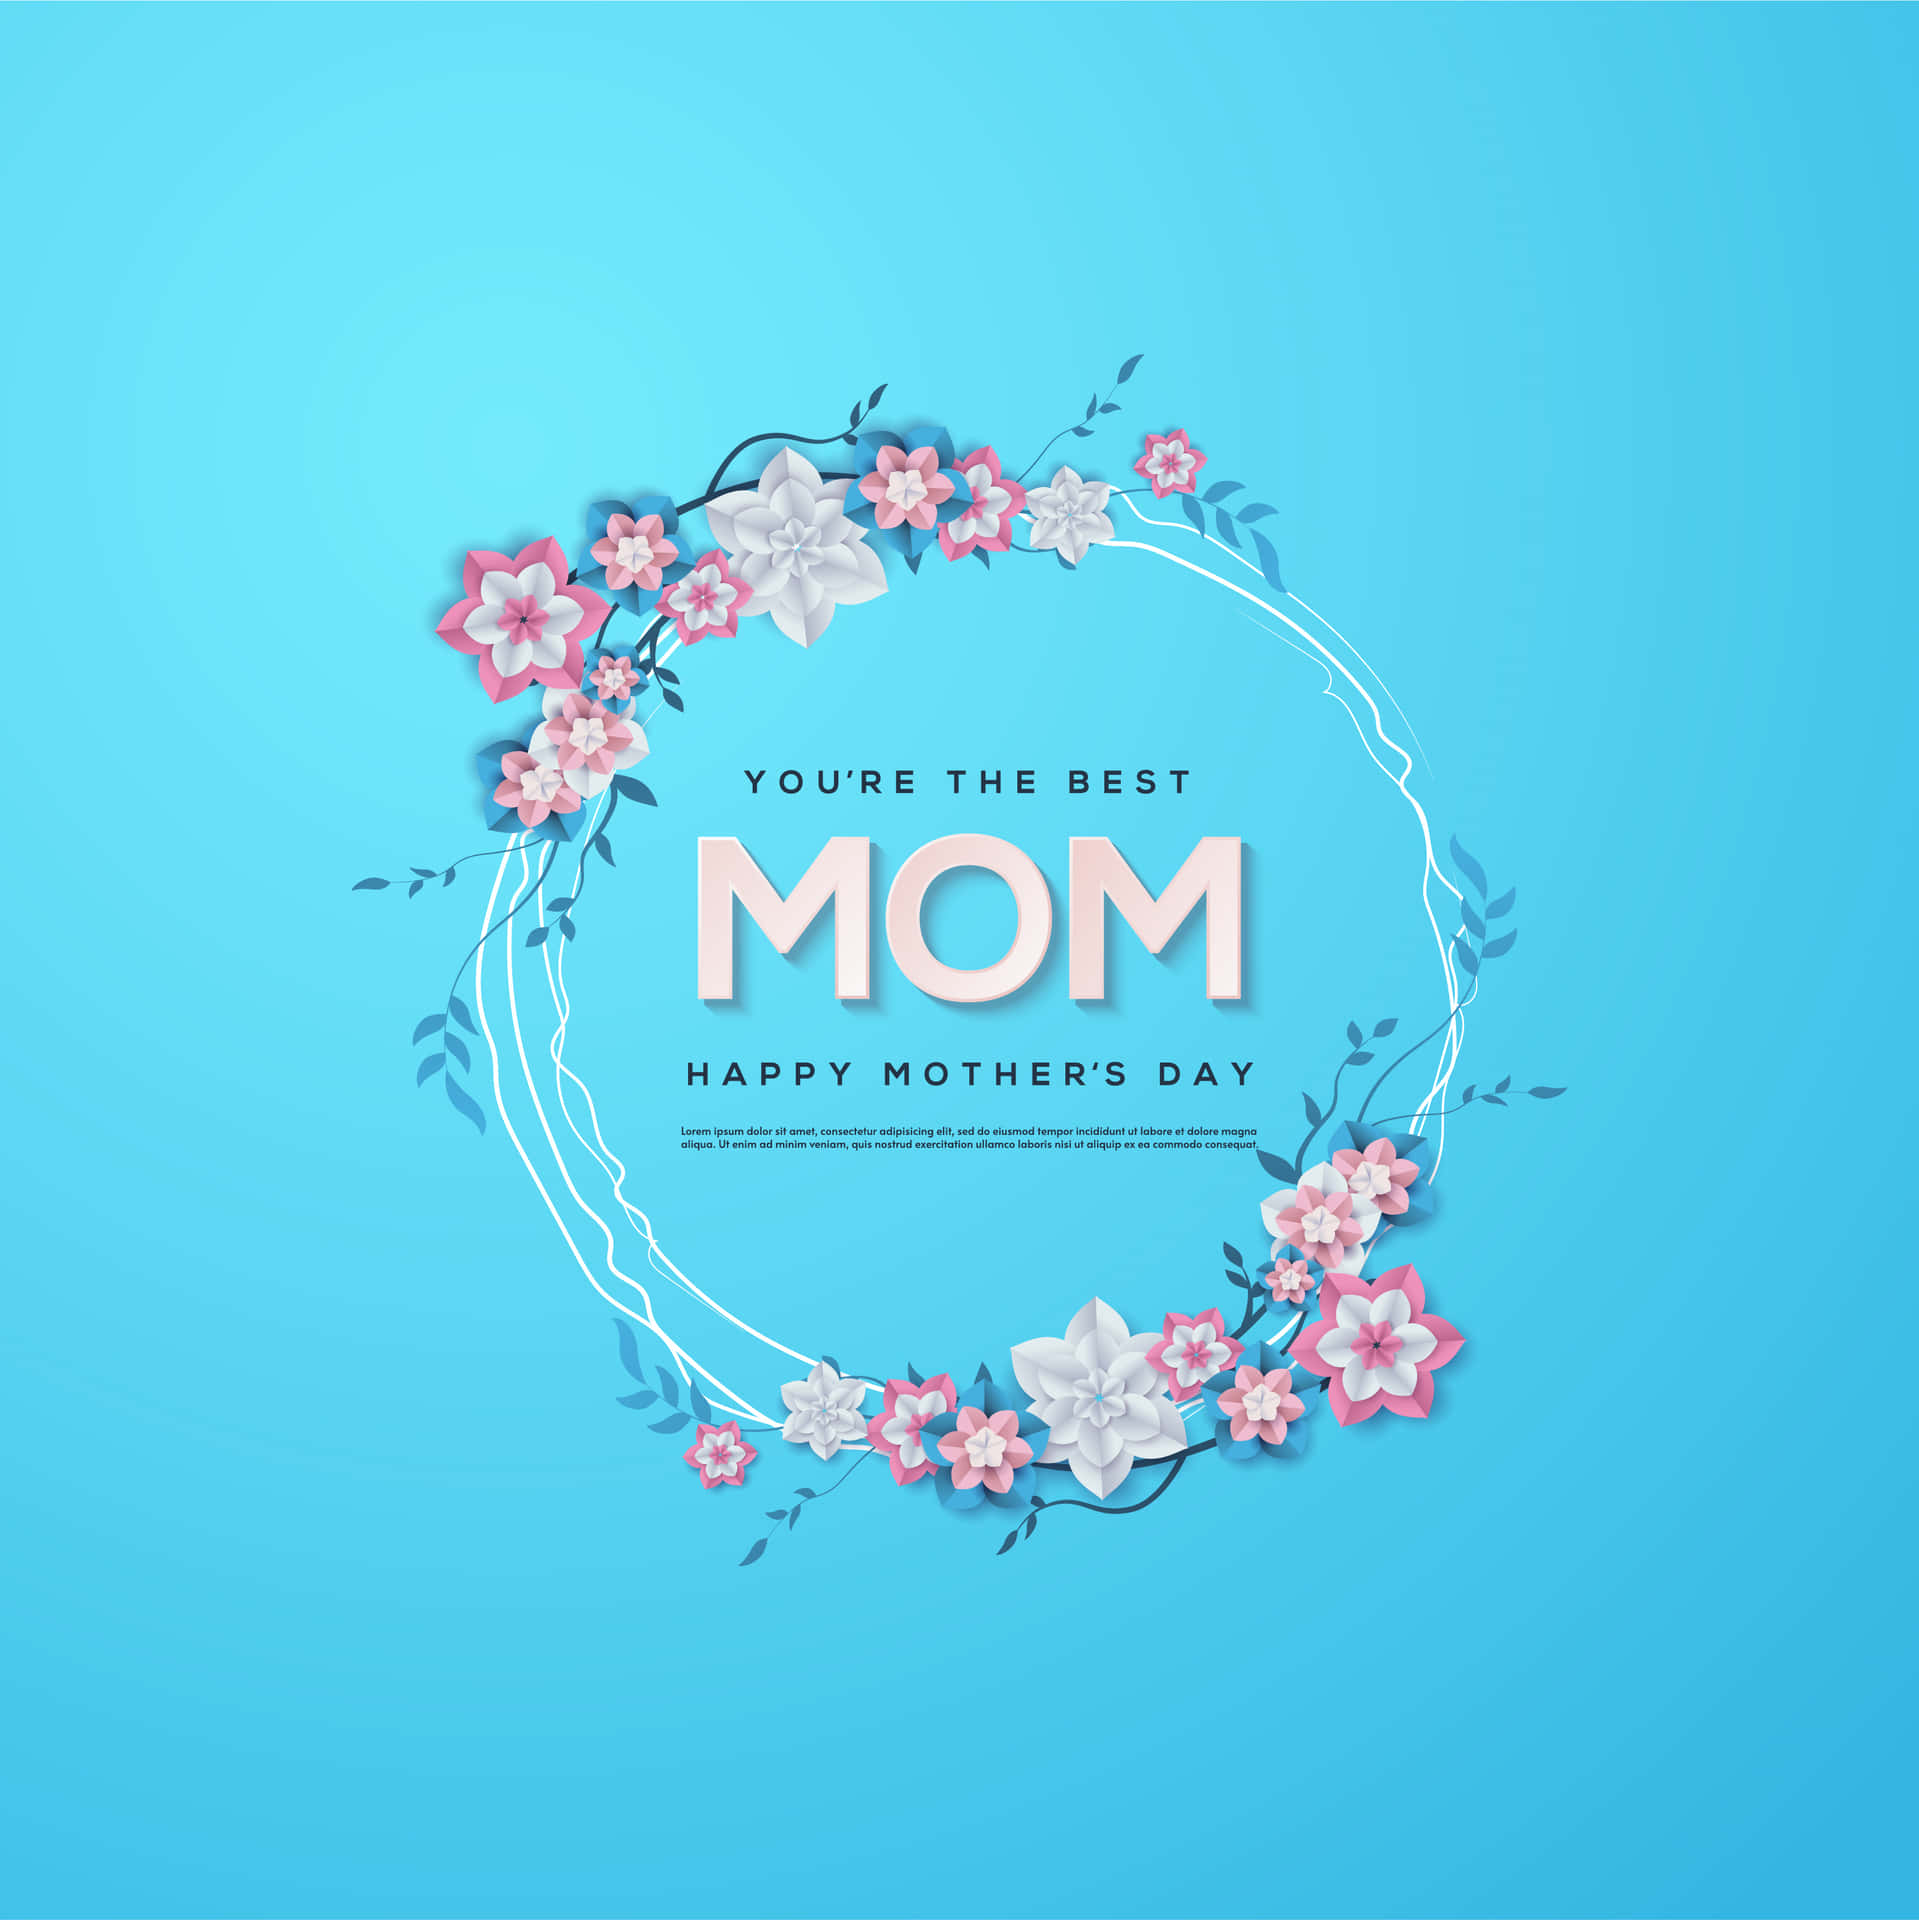 Happy Mother's Day Card With Flowers And A Blue Background